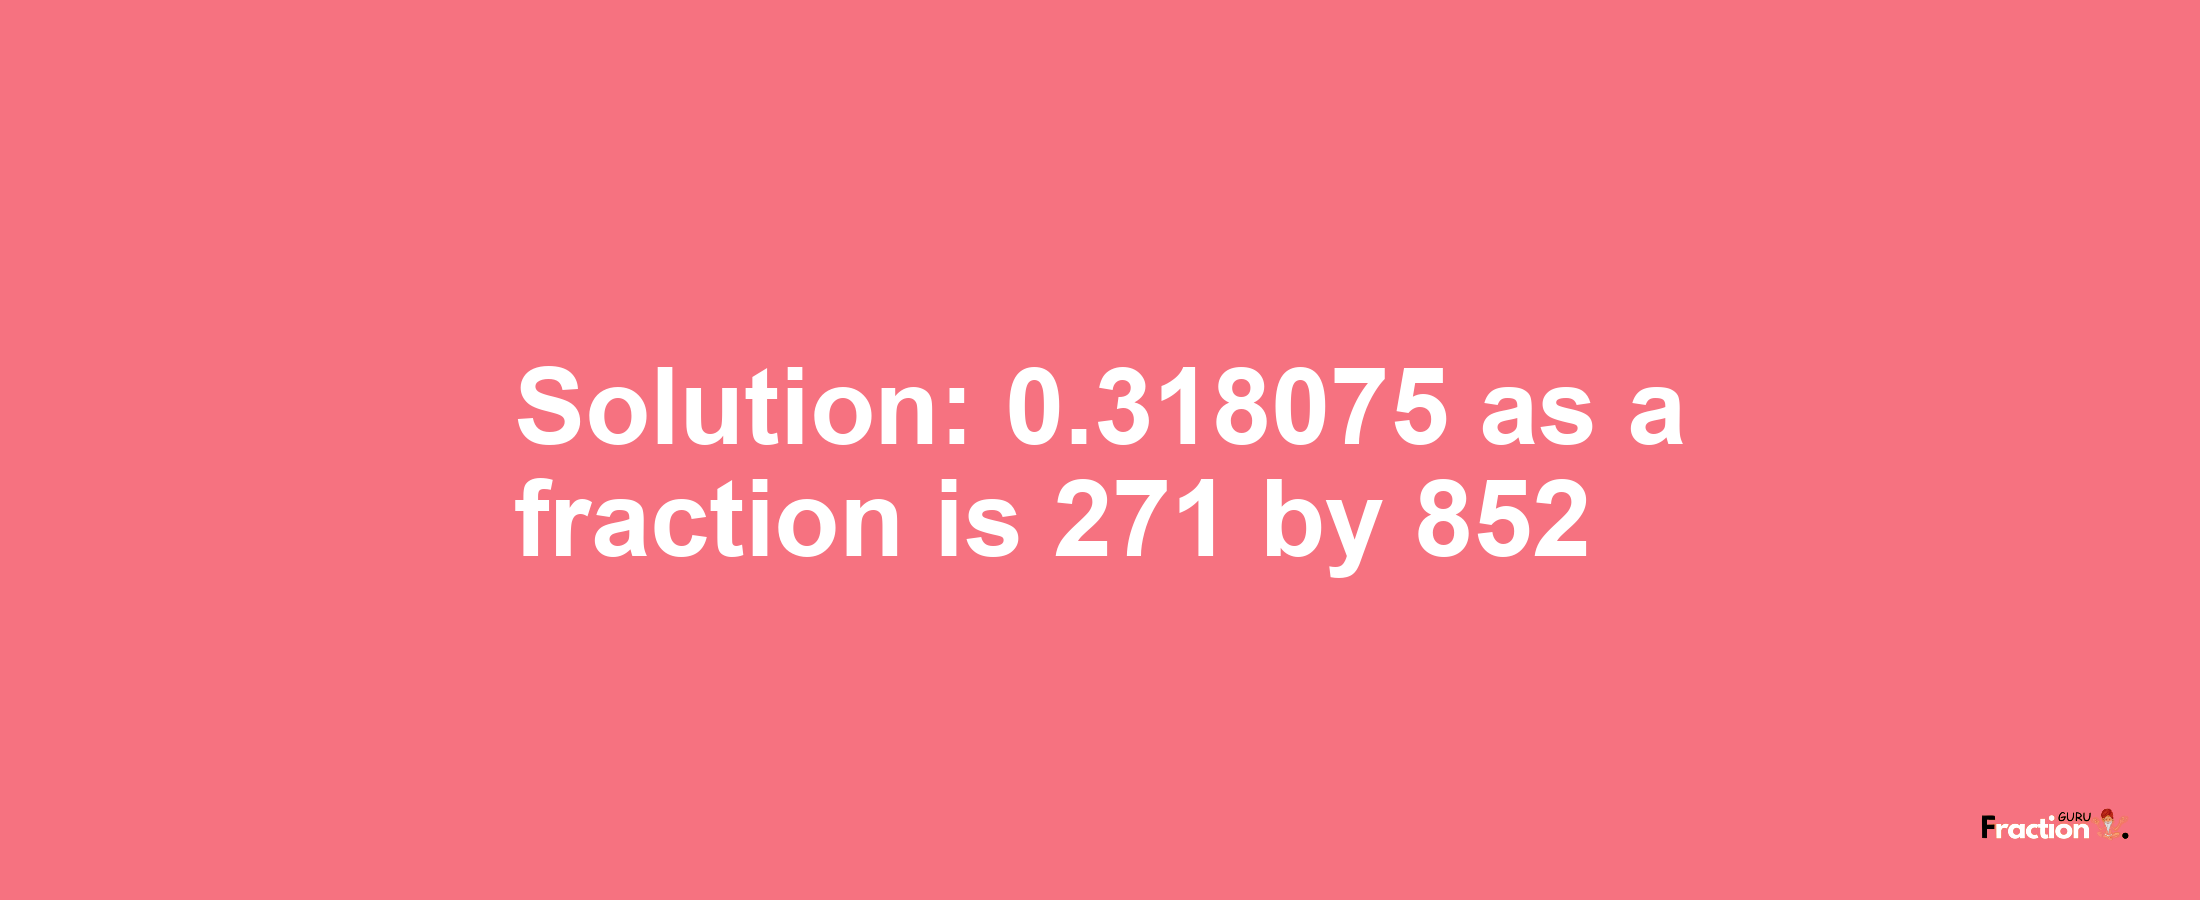 Solution:0.318075 as a fraction is 271/852